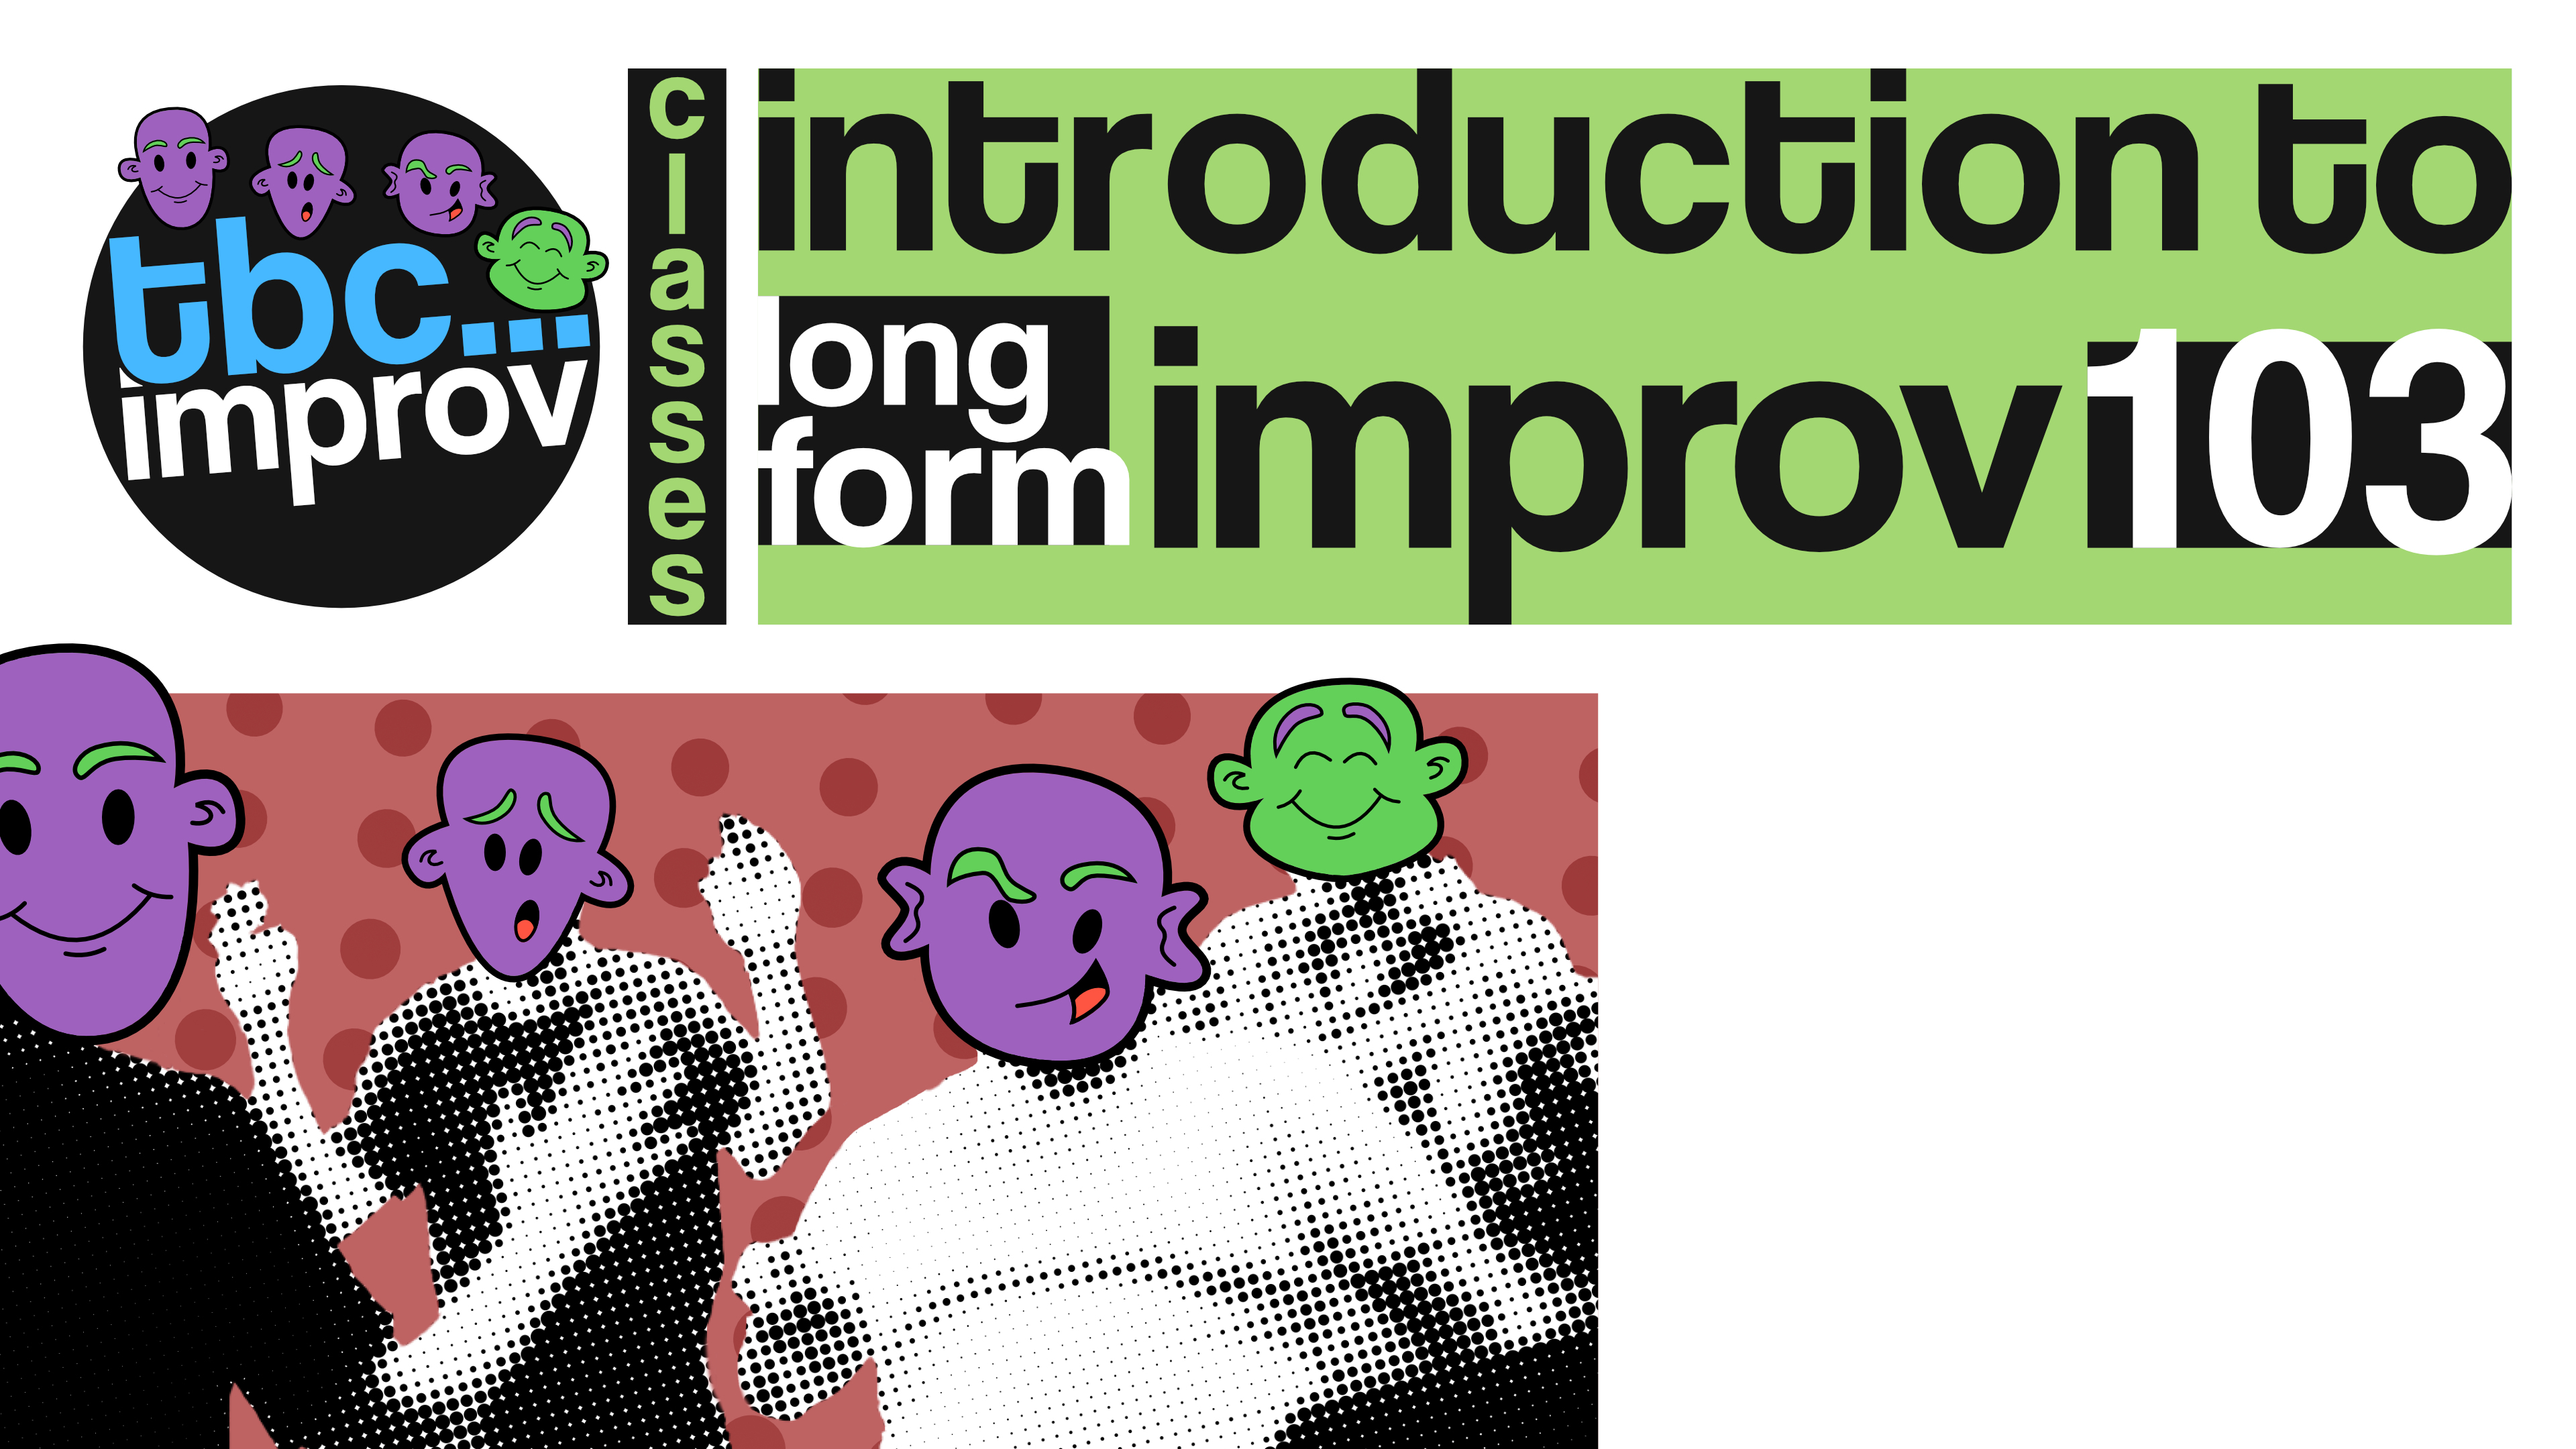 Introduction to Long-Form Improv